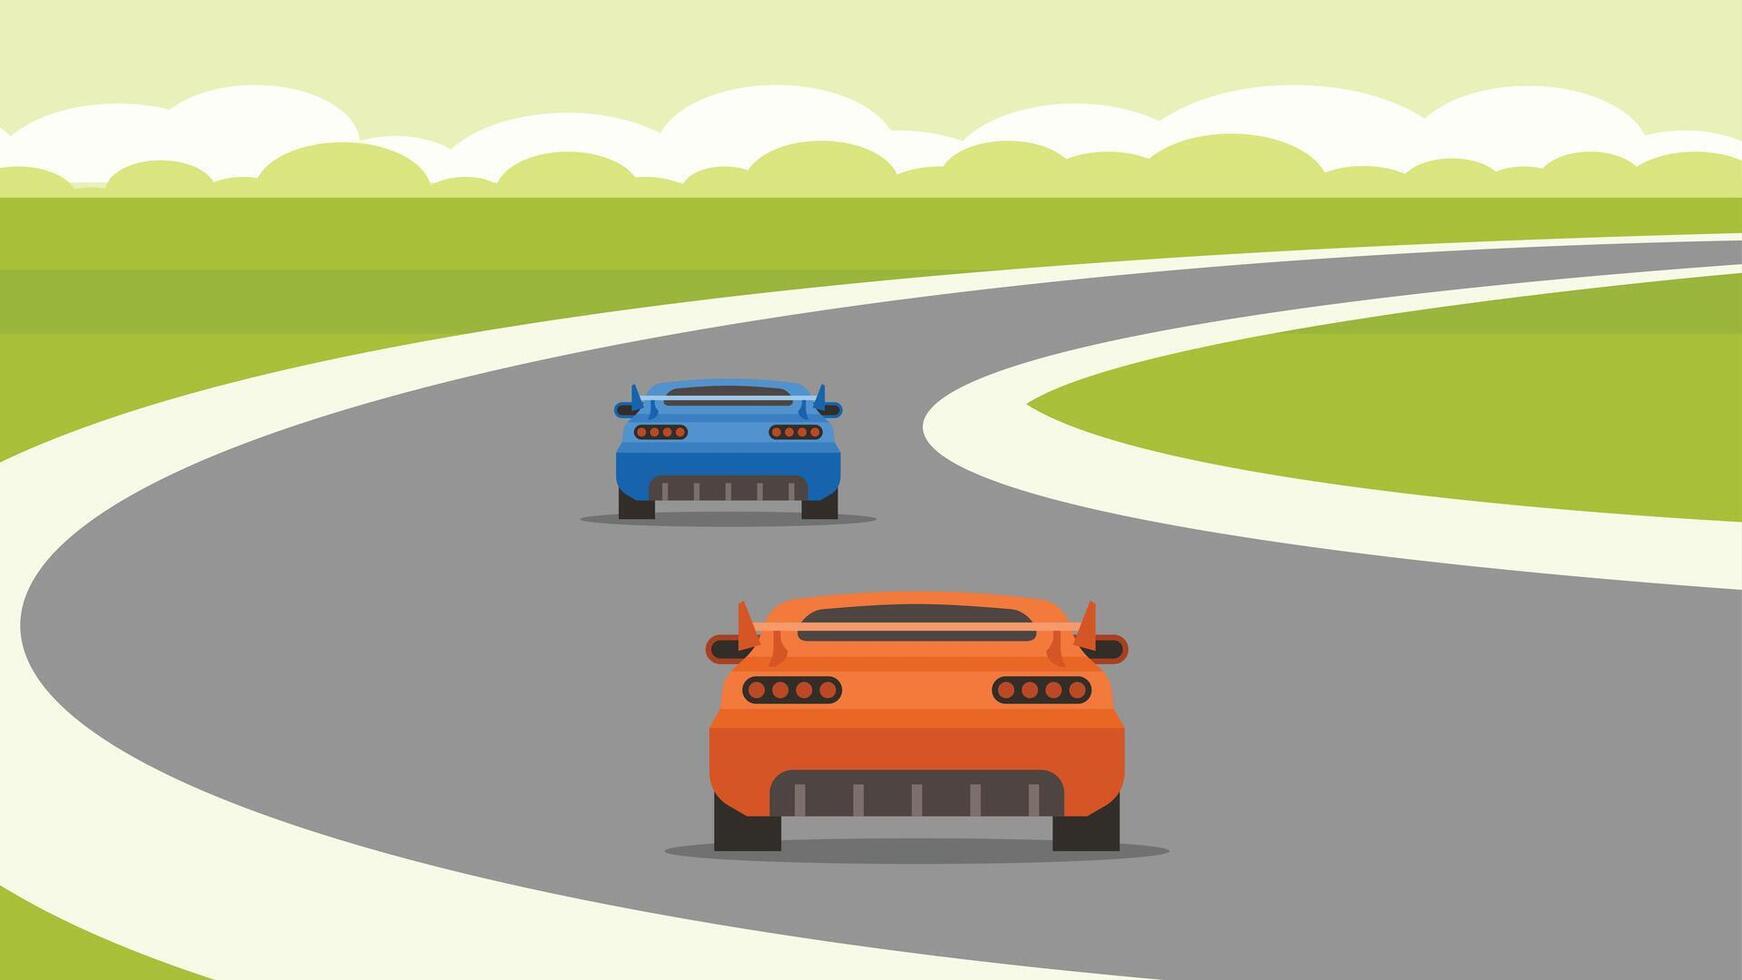 Racing cars in a racing lap illustration vector